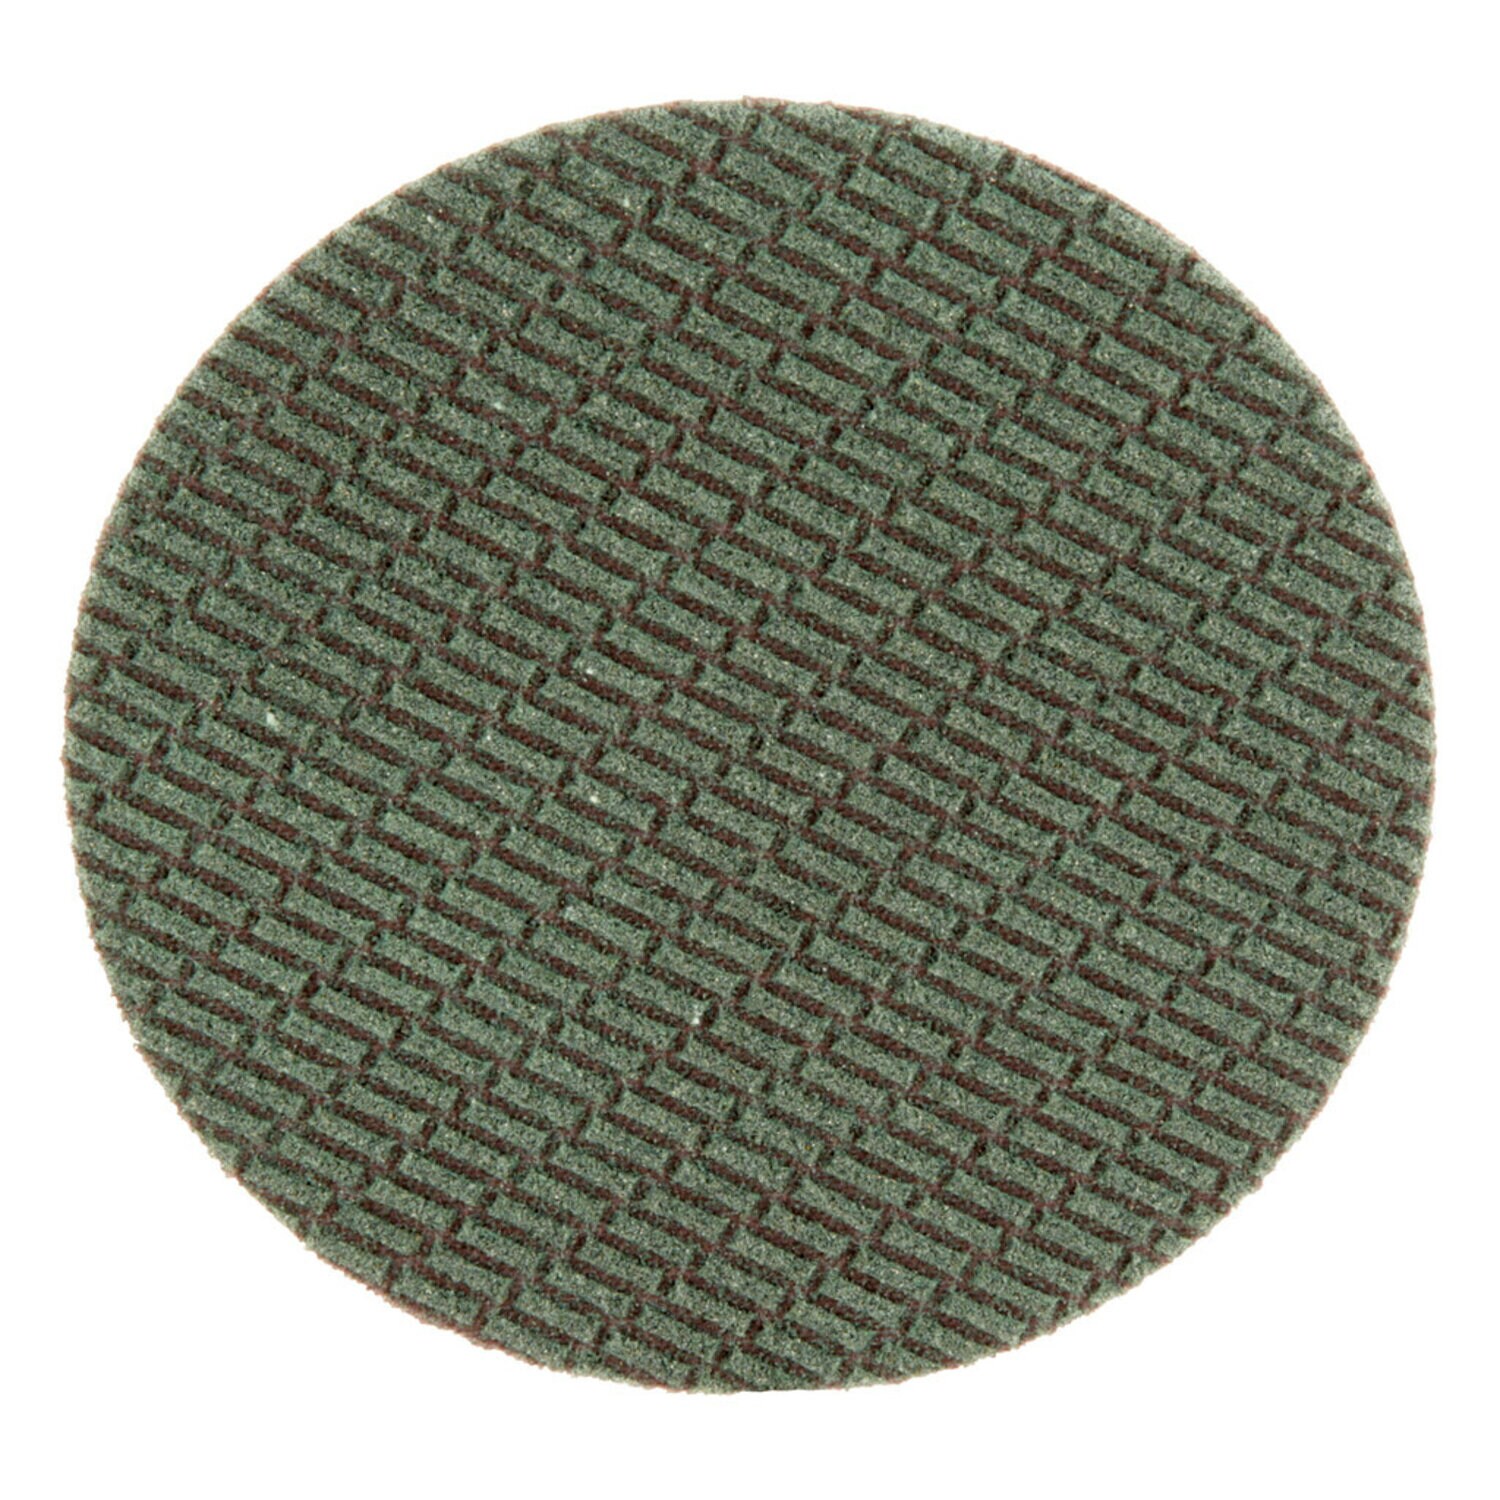 7000046226 - 3M Trizact Hookit Cloth Disc 337DC, 5 in x NH A300 X-weight, Die
500X, 50 ea/Case